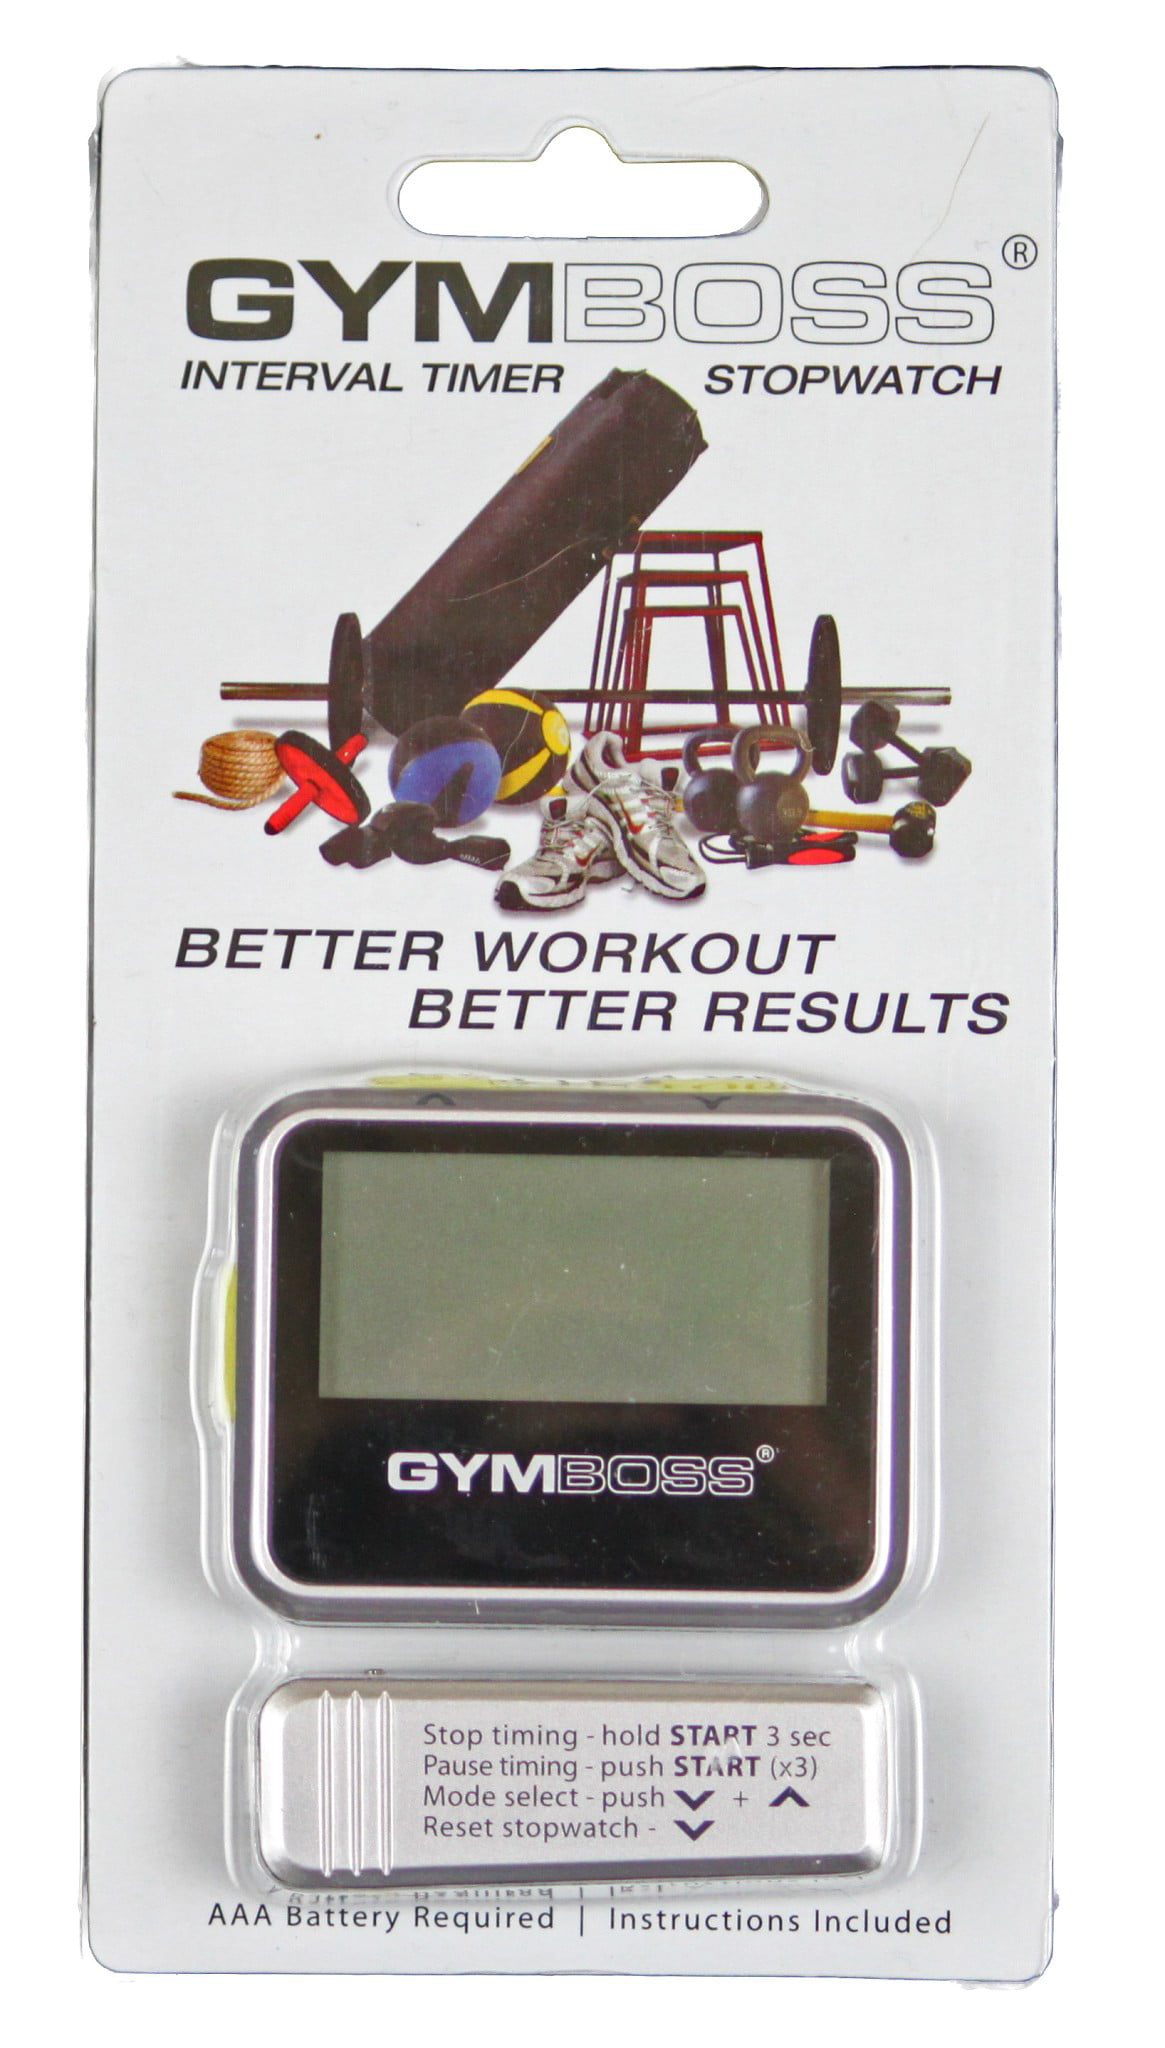 ARMBAND GYMBOSS INTERVAL TIMER & STOPWATCH ARMBAND STRAP FROM GYMBOSS HQ 